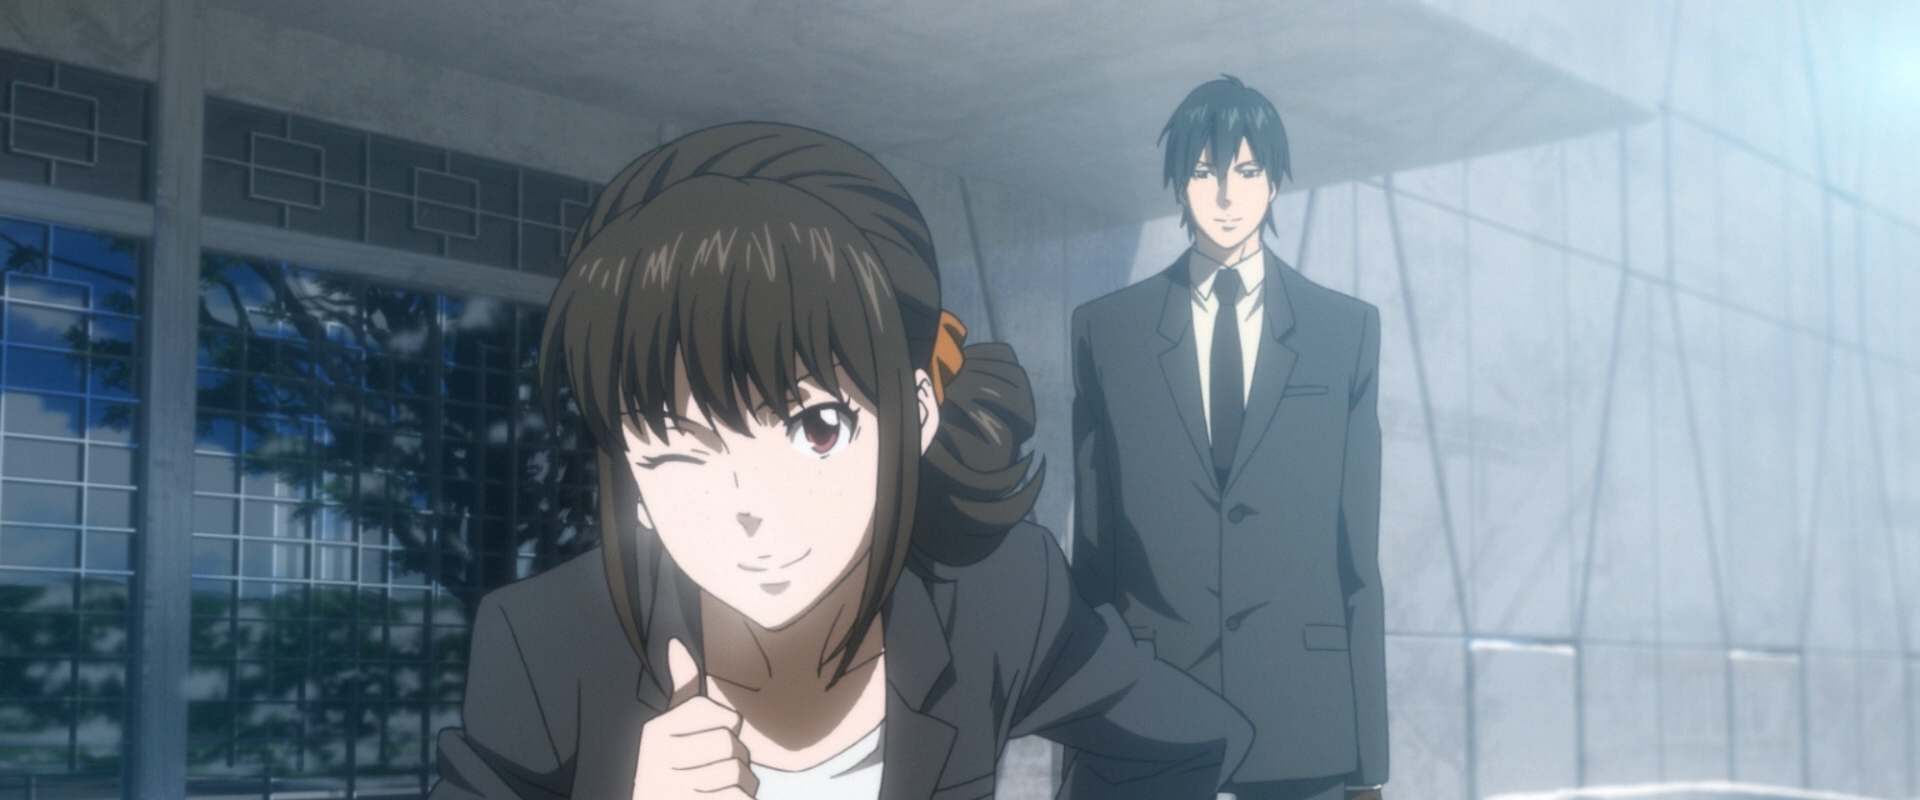 Psycho-Pass: Sinners of the System -  Case.1 Crime and Punishment background 2